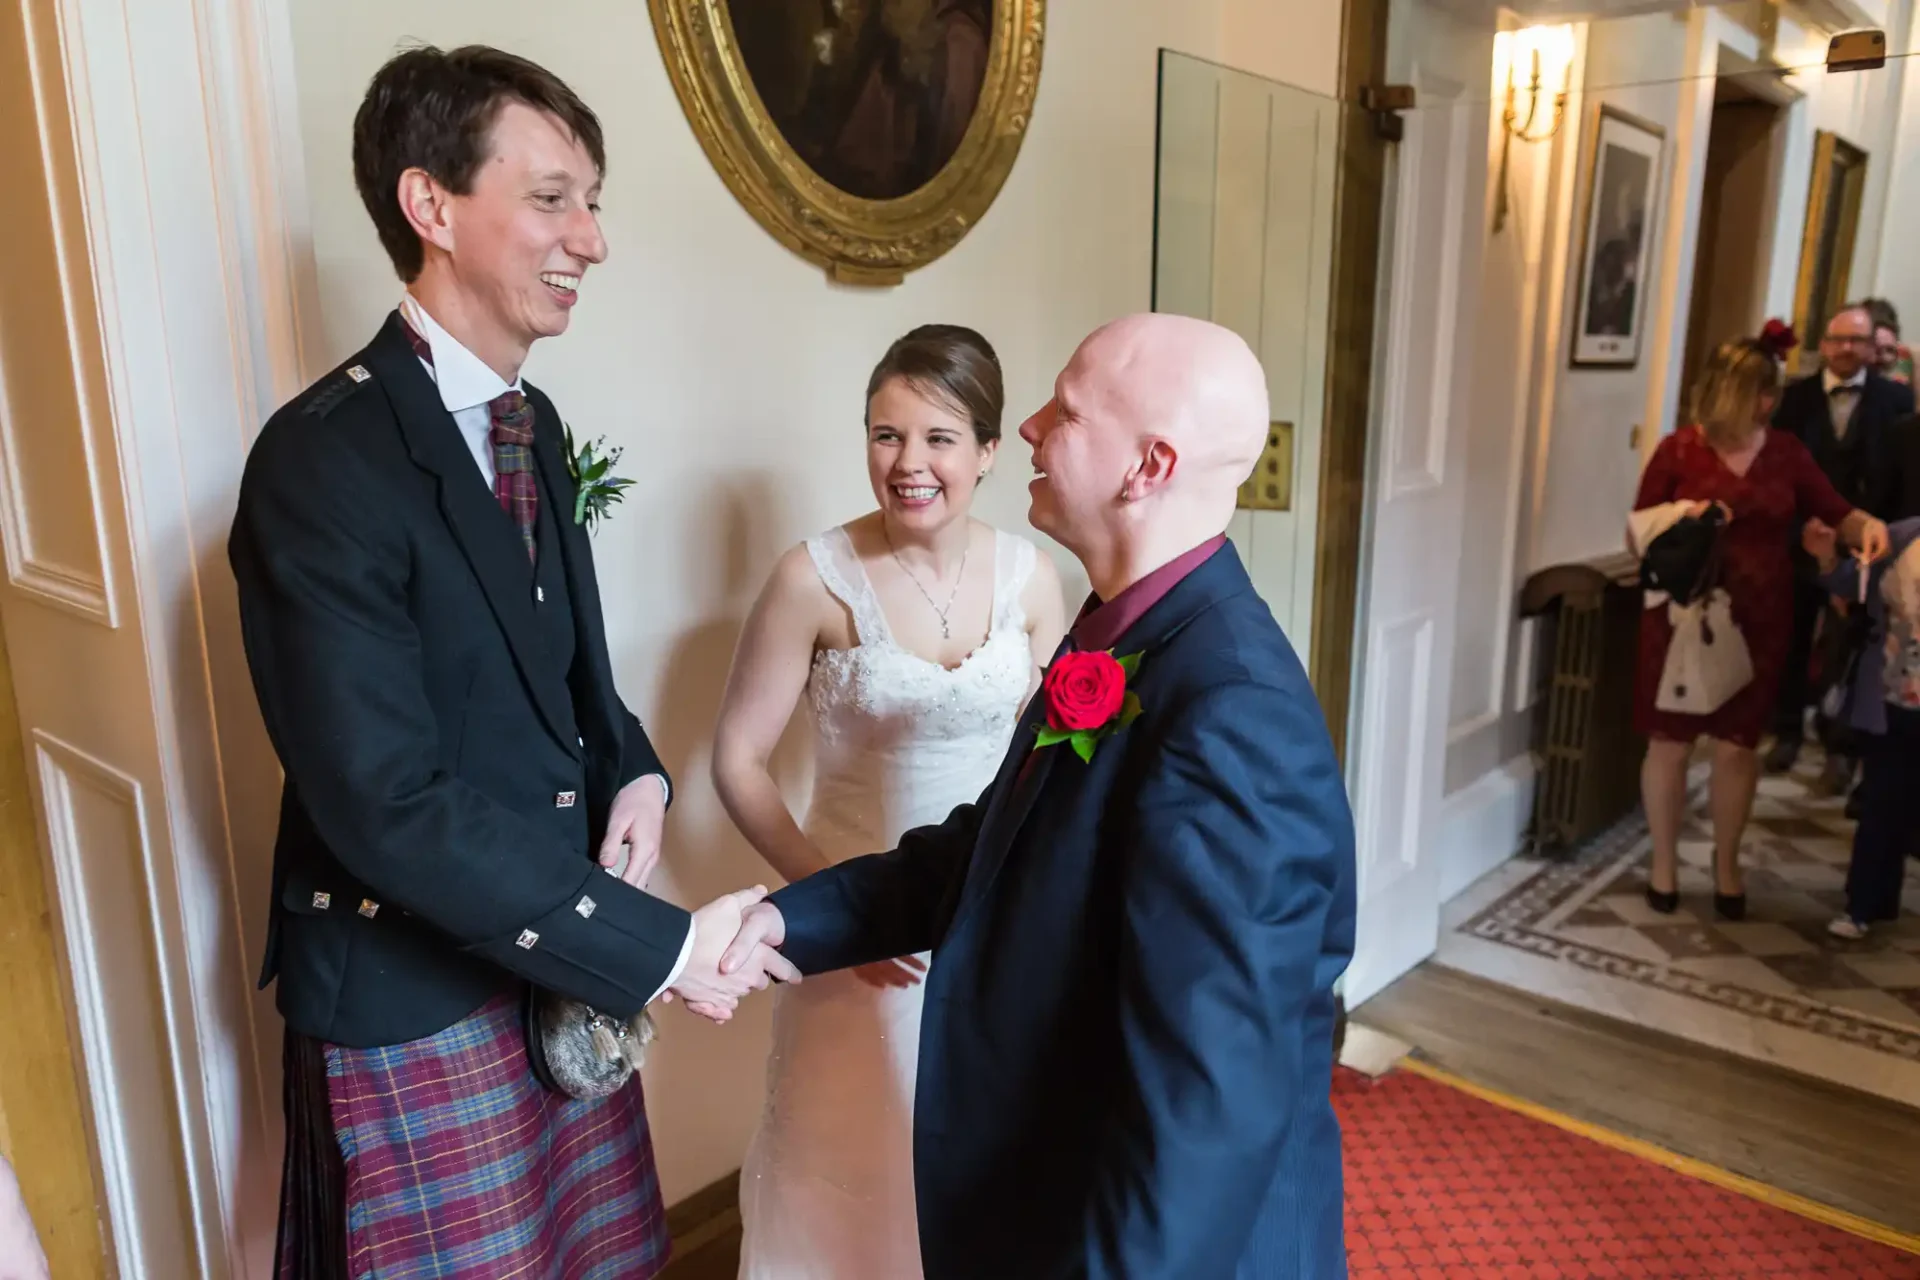 A bride and groom shake hands with a guest at their wedding, the groom in a kilt and the bride in a white dress, smiling in a hallway with onlookers.